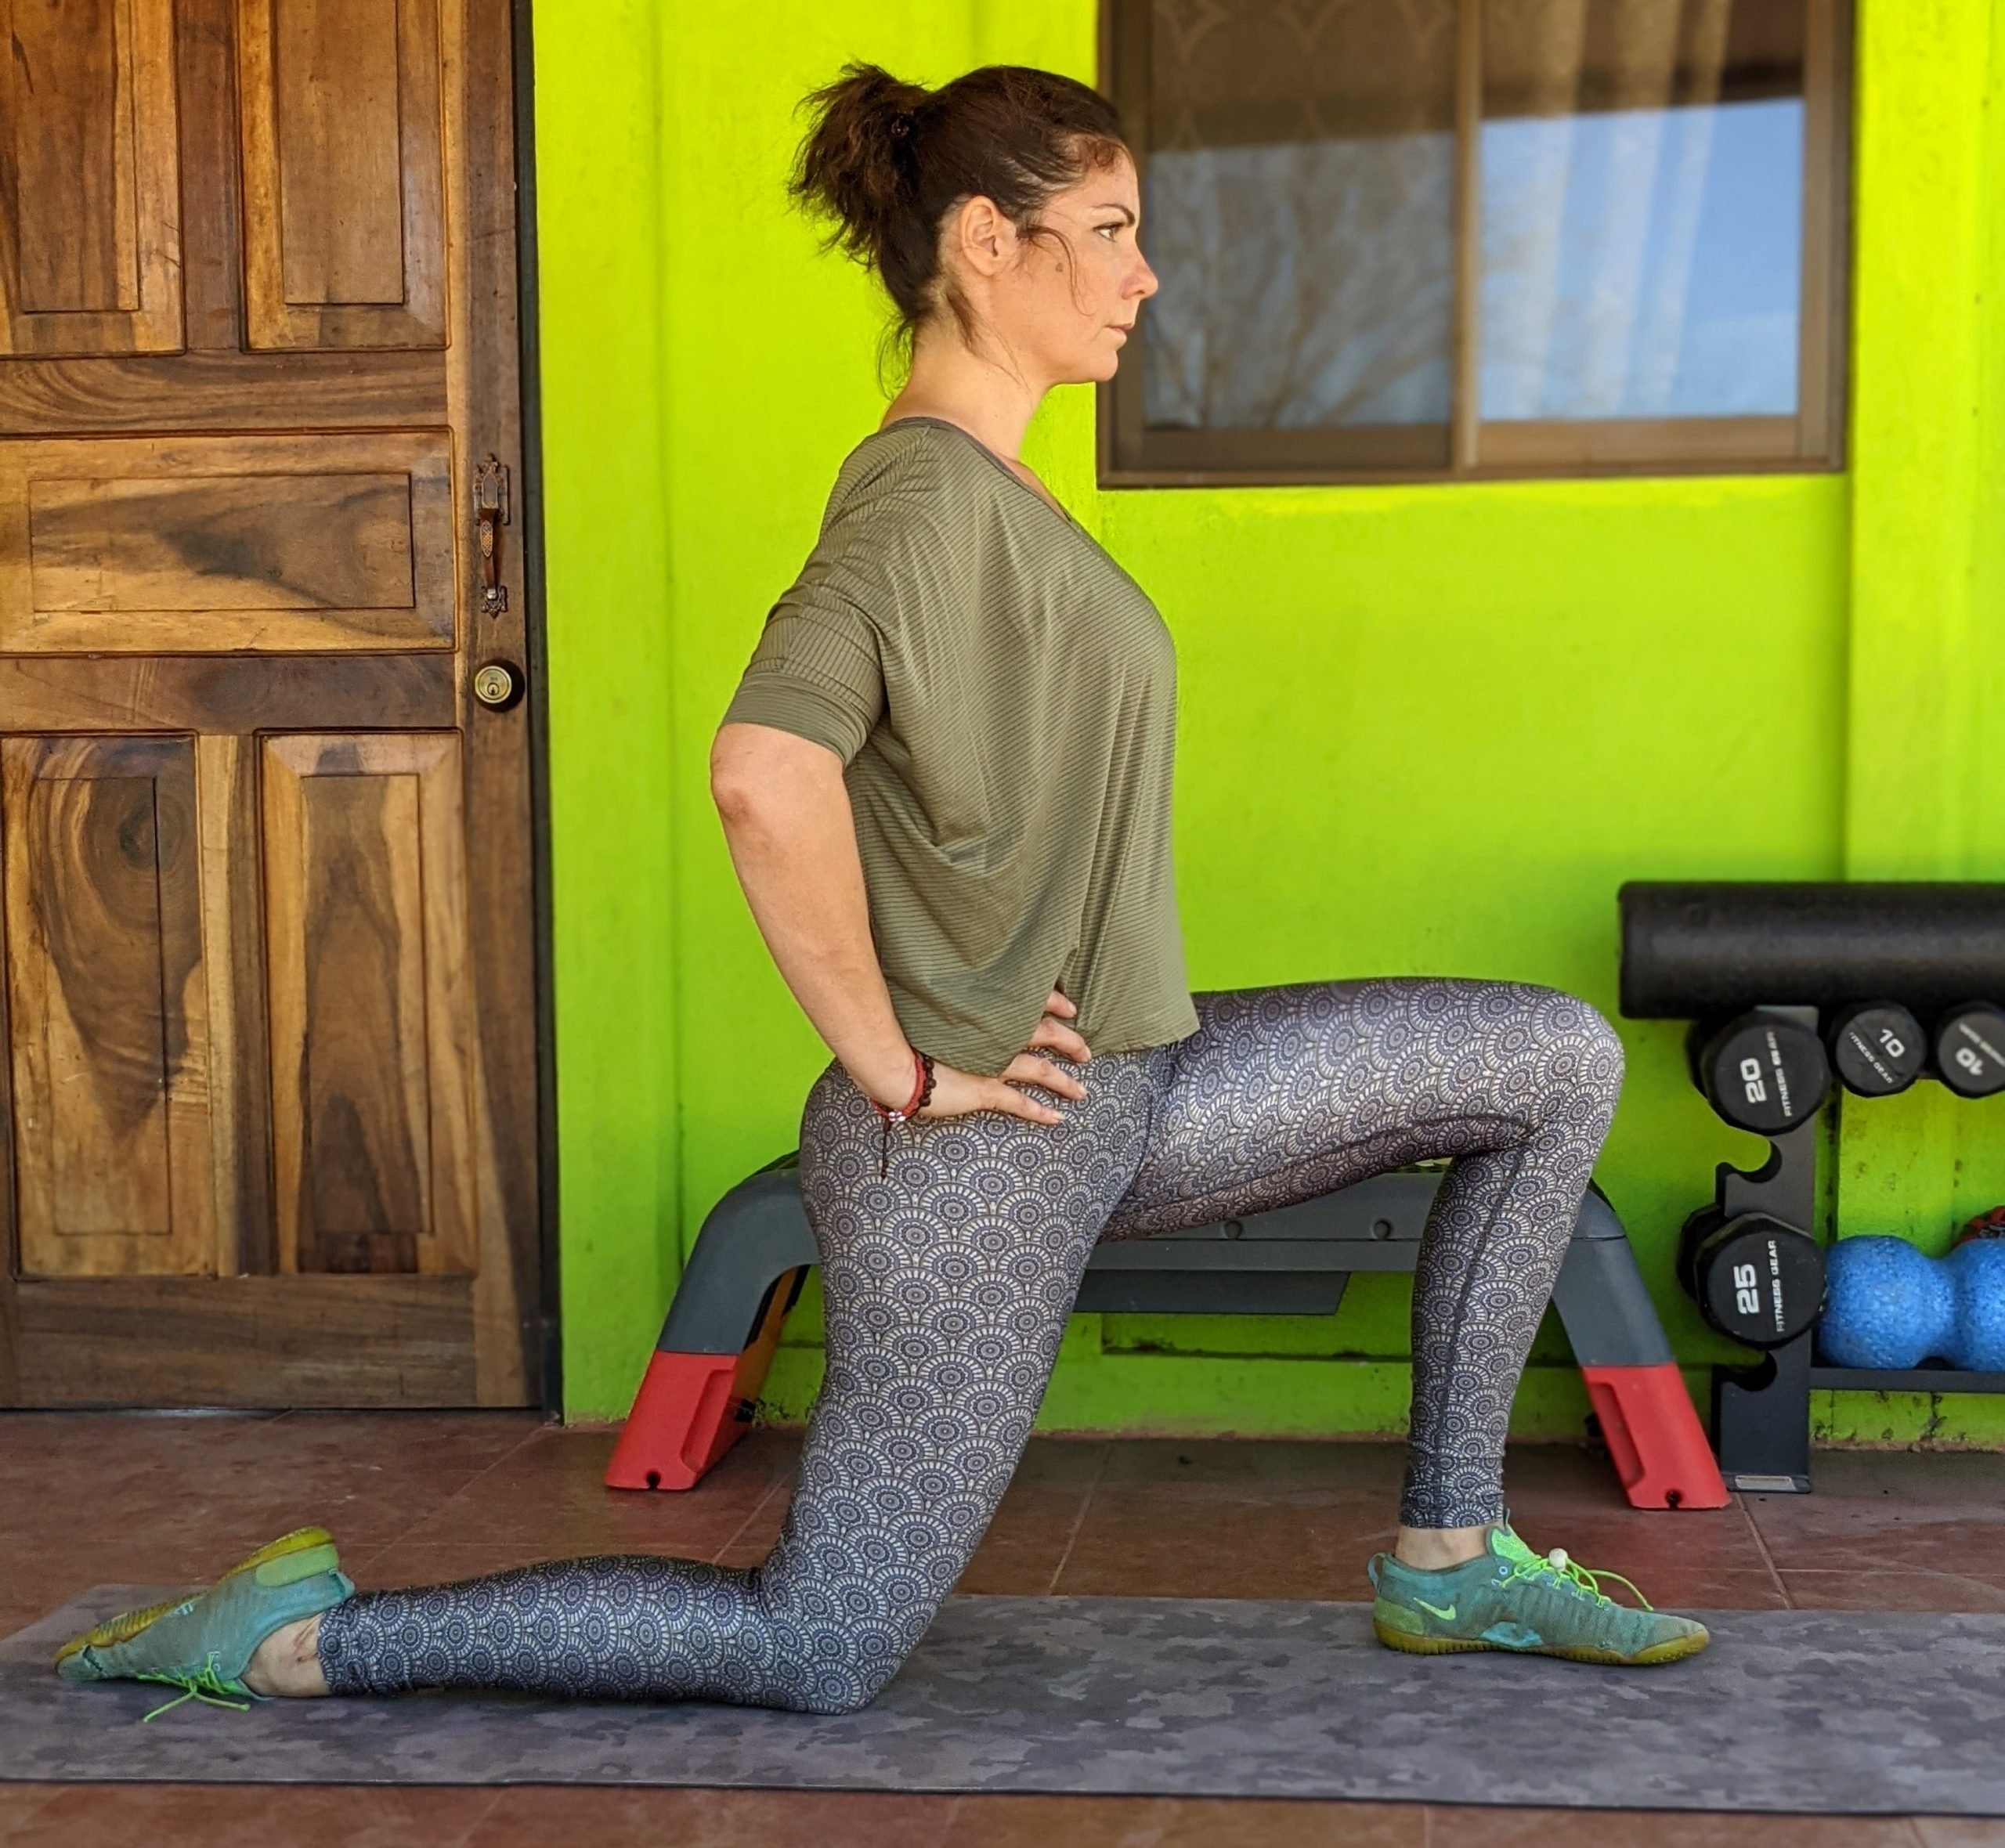 Got Hip Pain? 6 Stretches That Can Make It Better